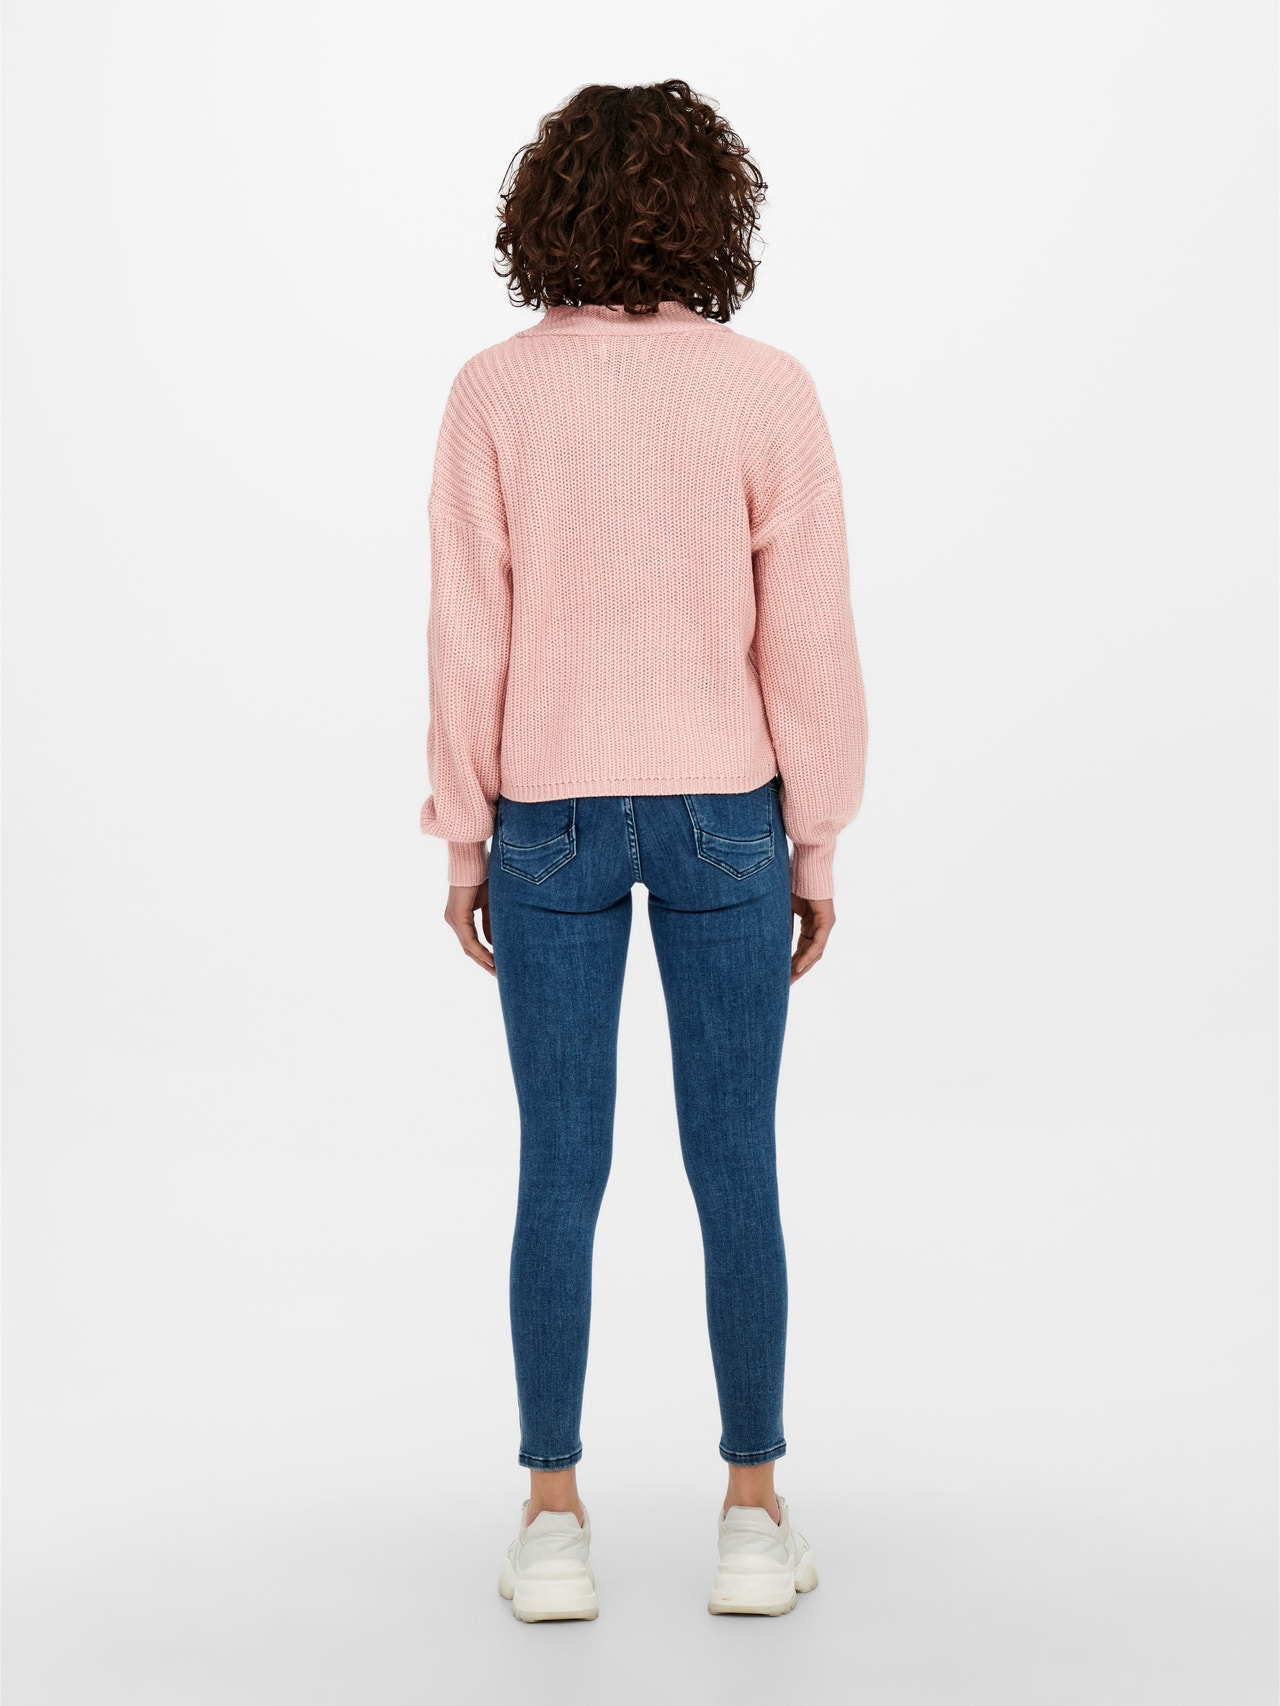 ONLY Couleur unie Cardigan en maille -Rose Smoke - 15252685